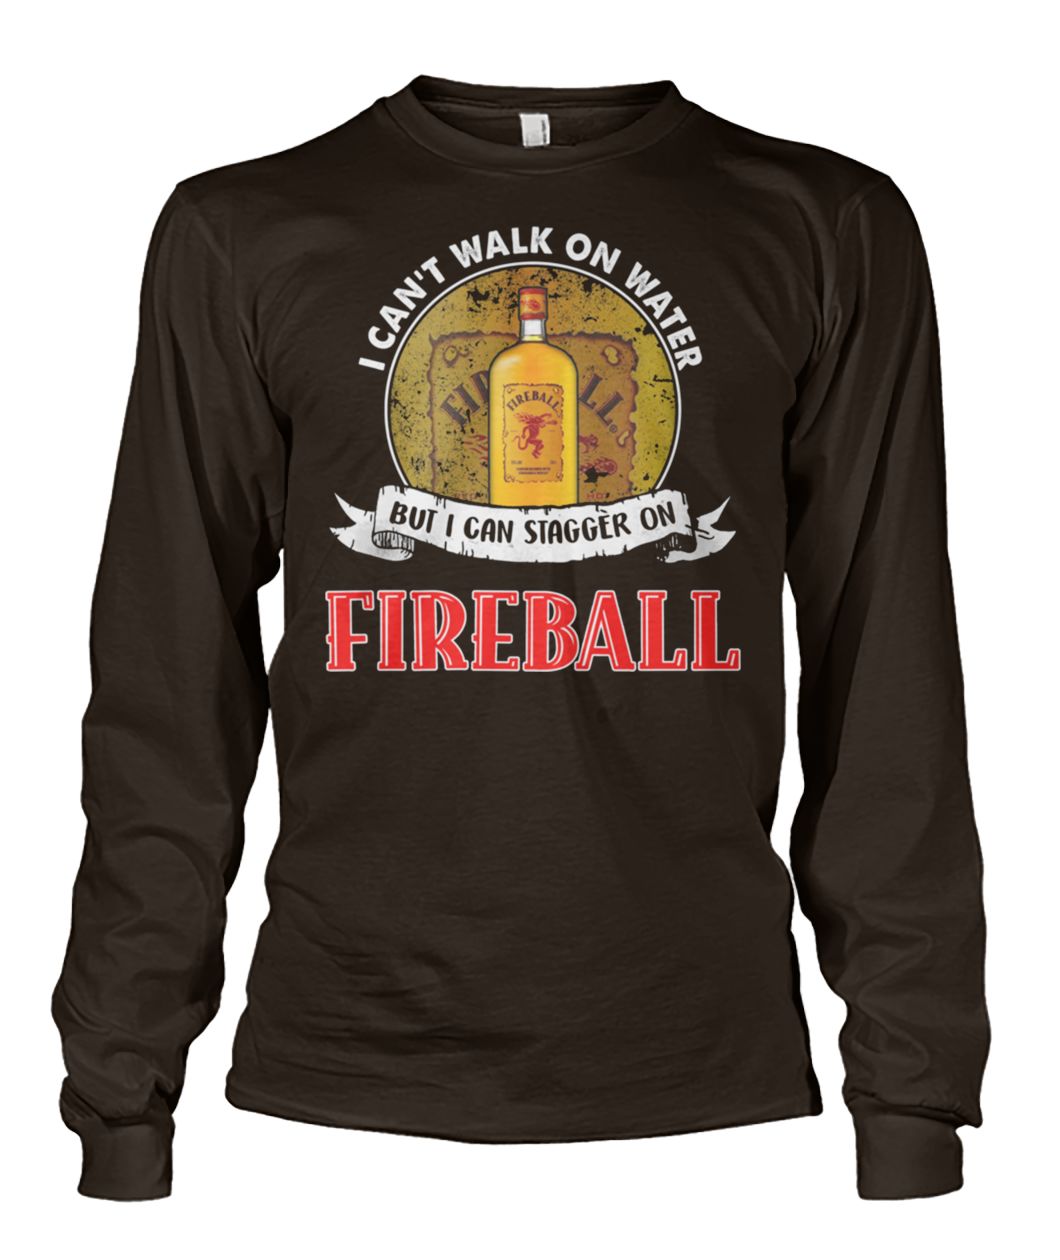 I can't walk on water but I can stagger on fireball unisex long sleeve